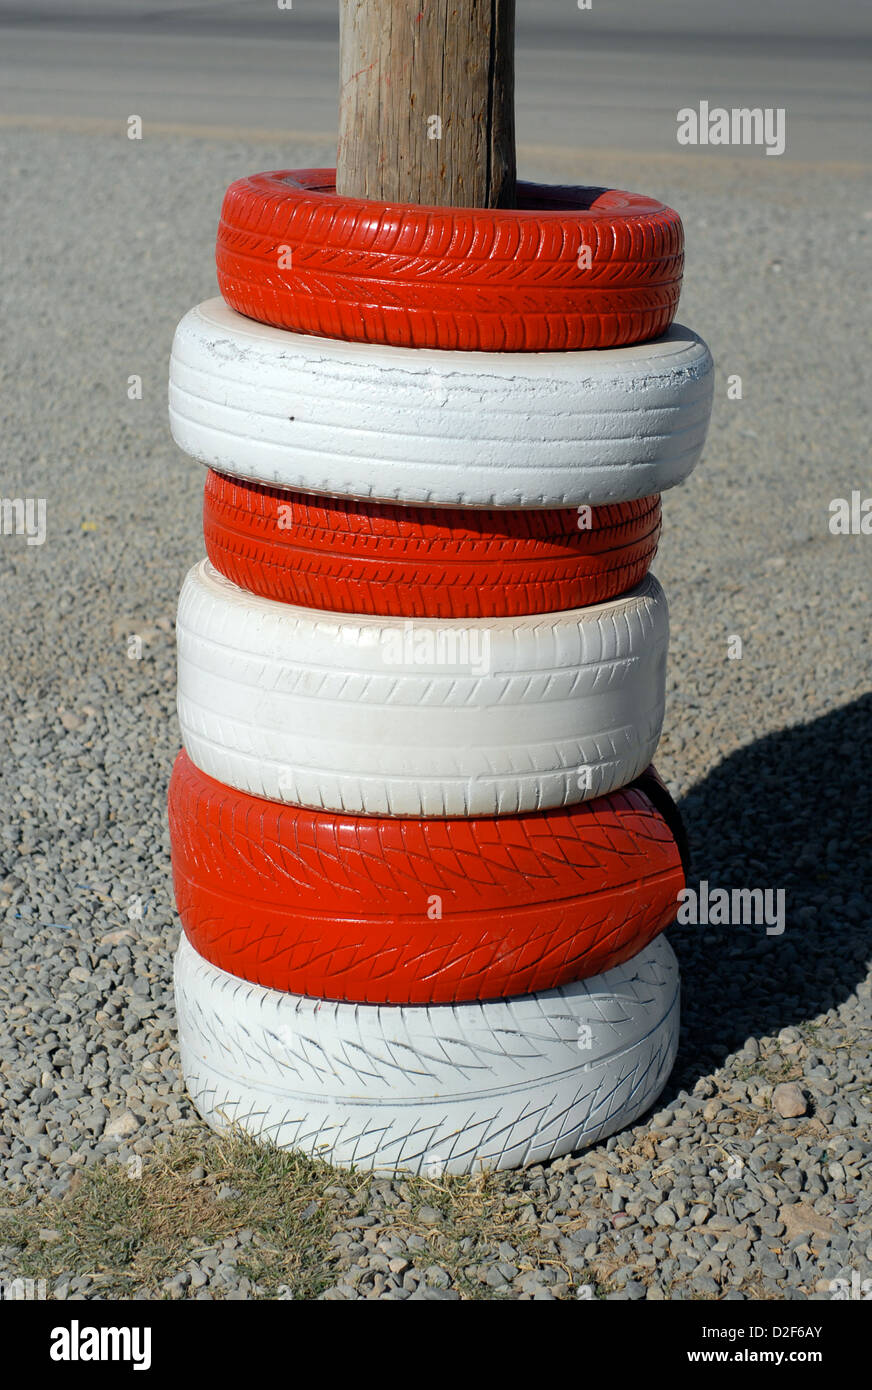 red and white painted car tyres protecting a telephone pole at a petrol station in morocco Stock Photo